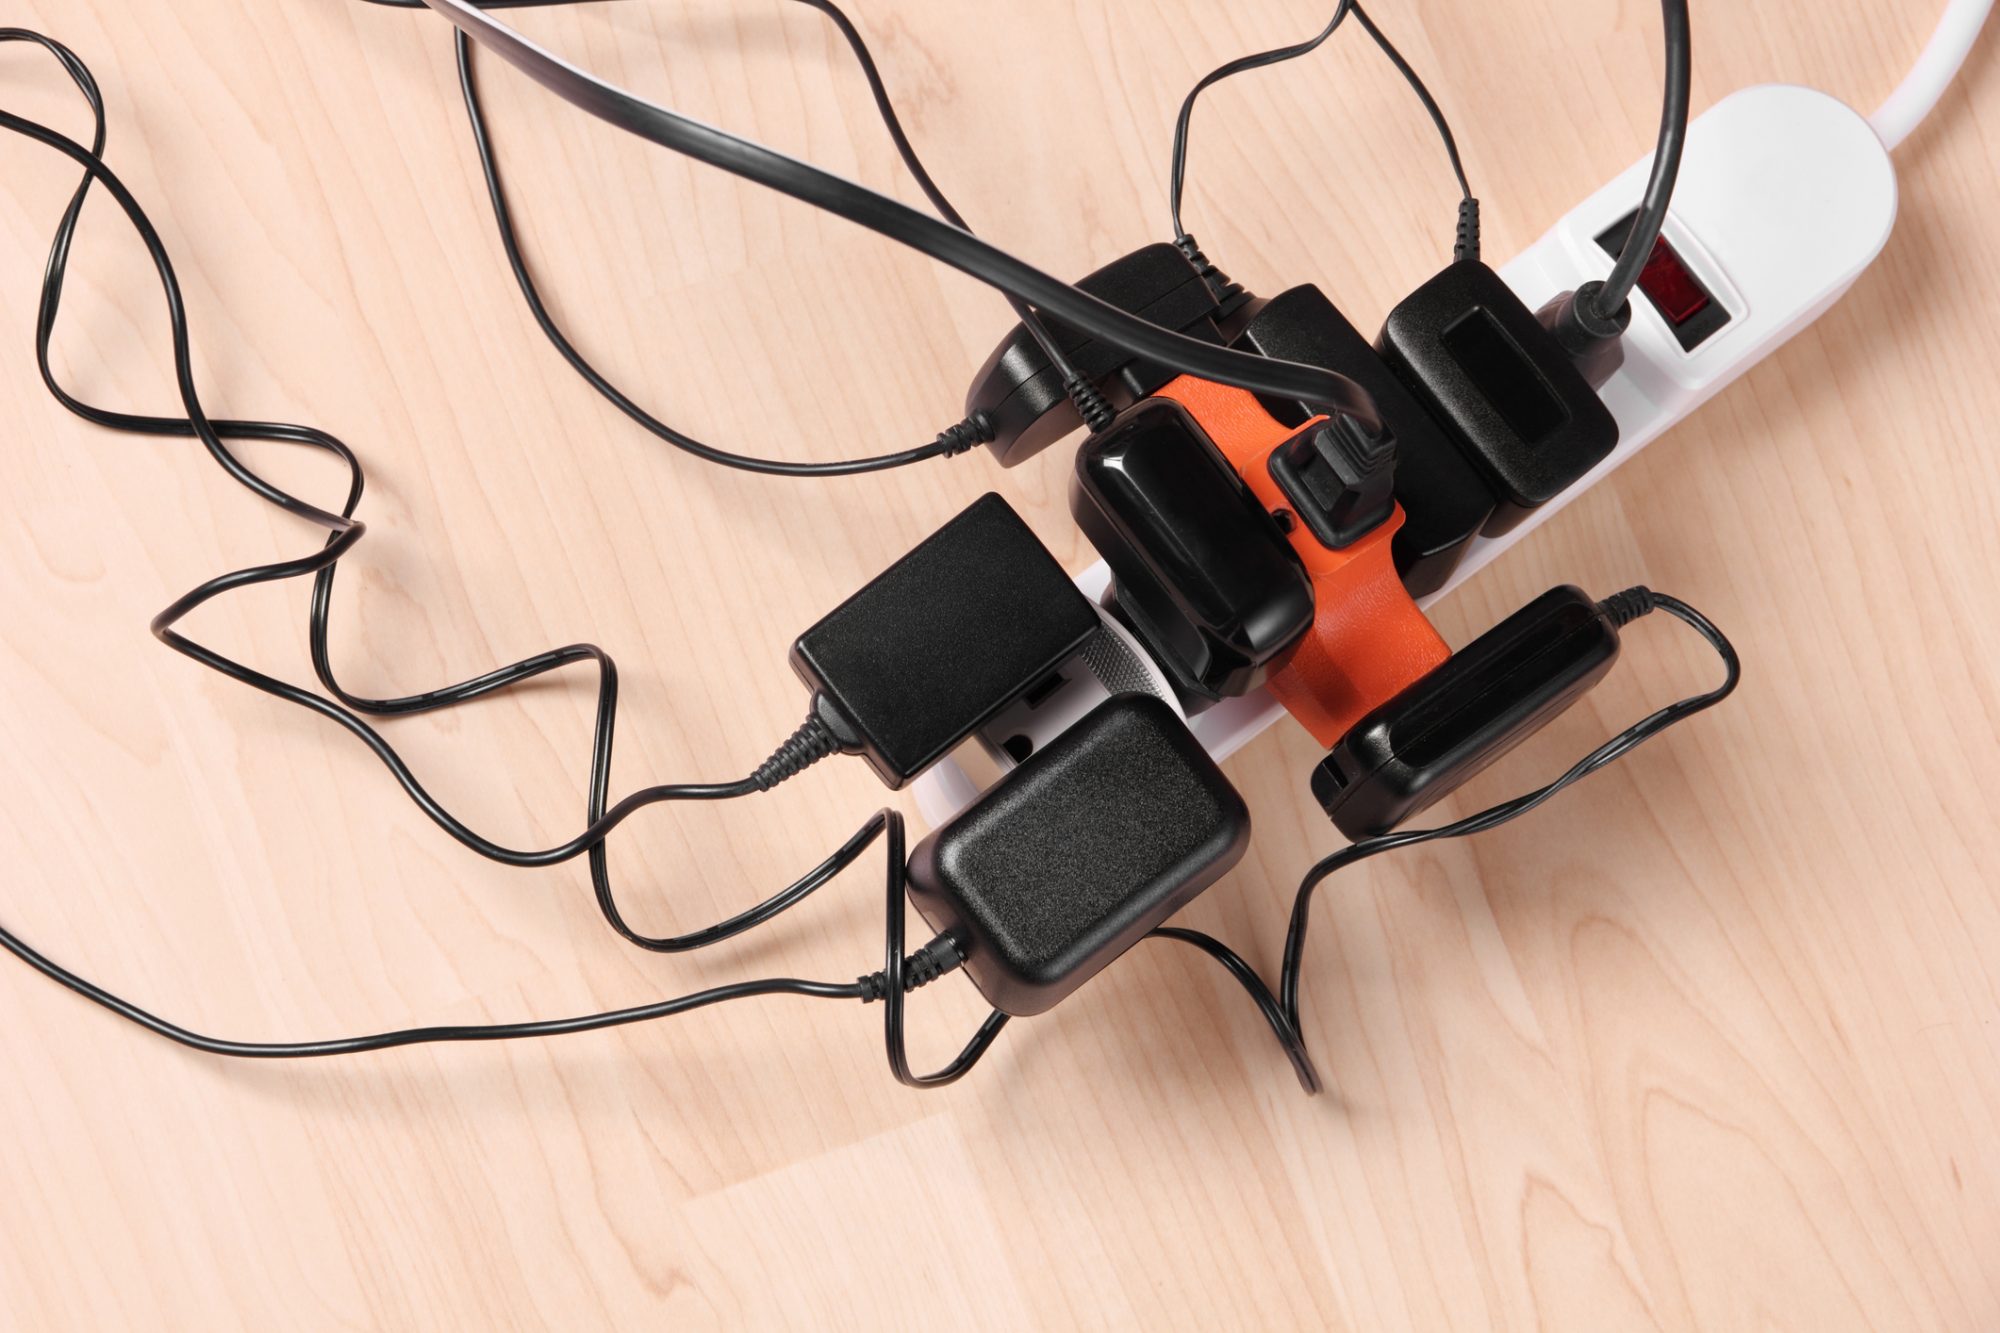 Hide Wires Around the House With These Clever Hacks